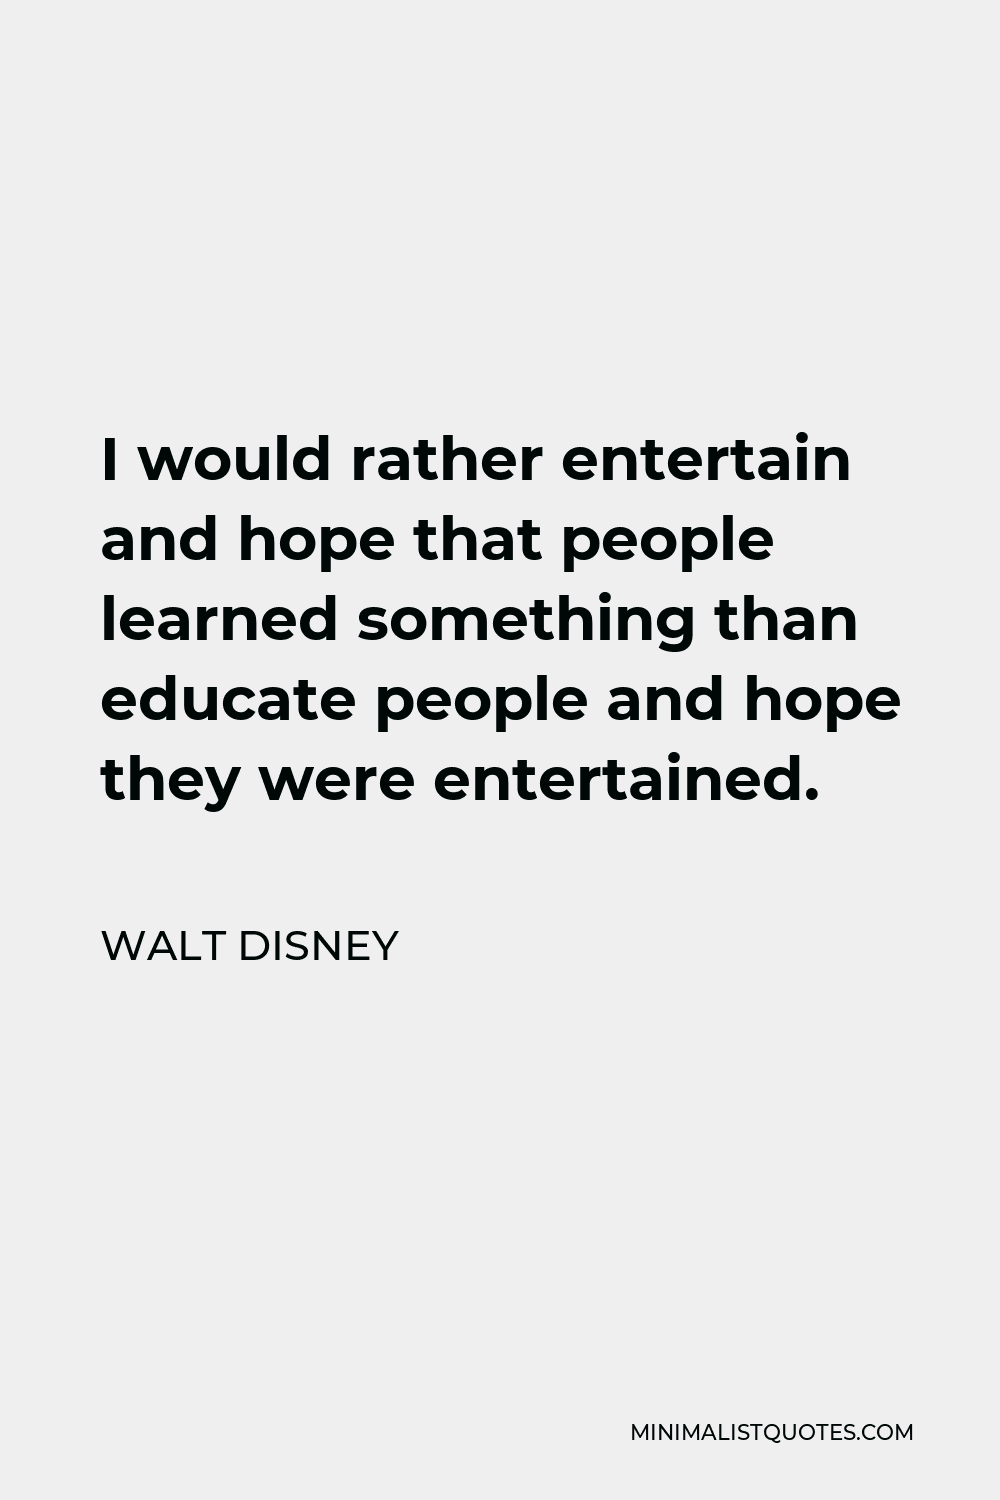 Walt Disney Quote - I would rather entertain and hope that people learned something than educate people and hope they were entertained.